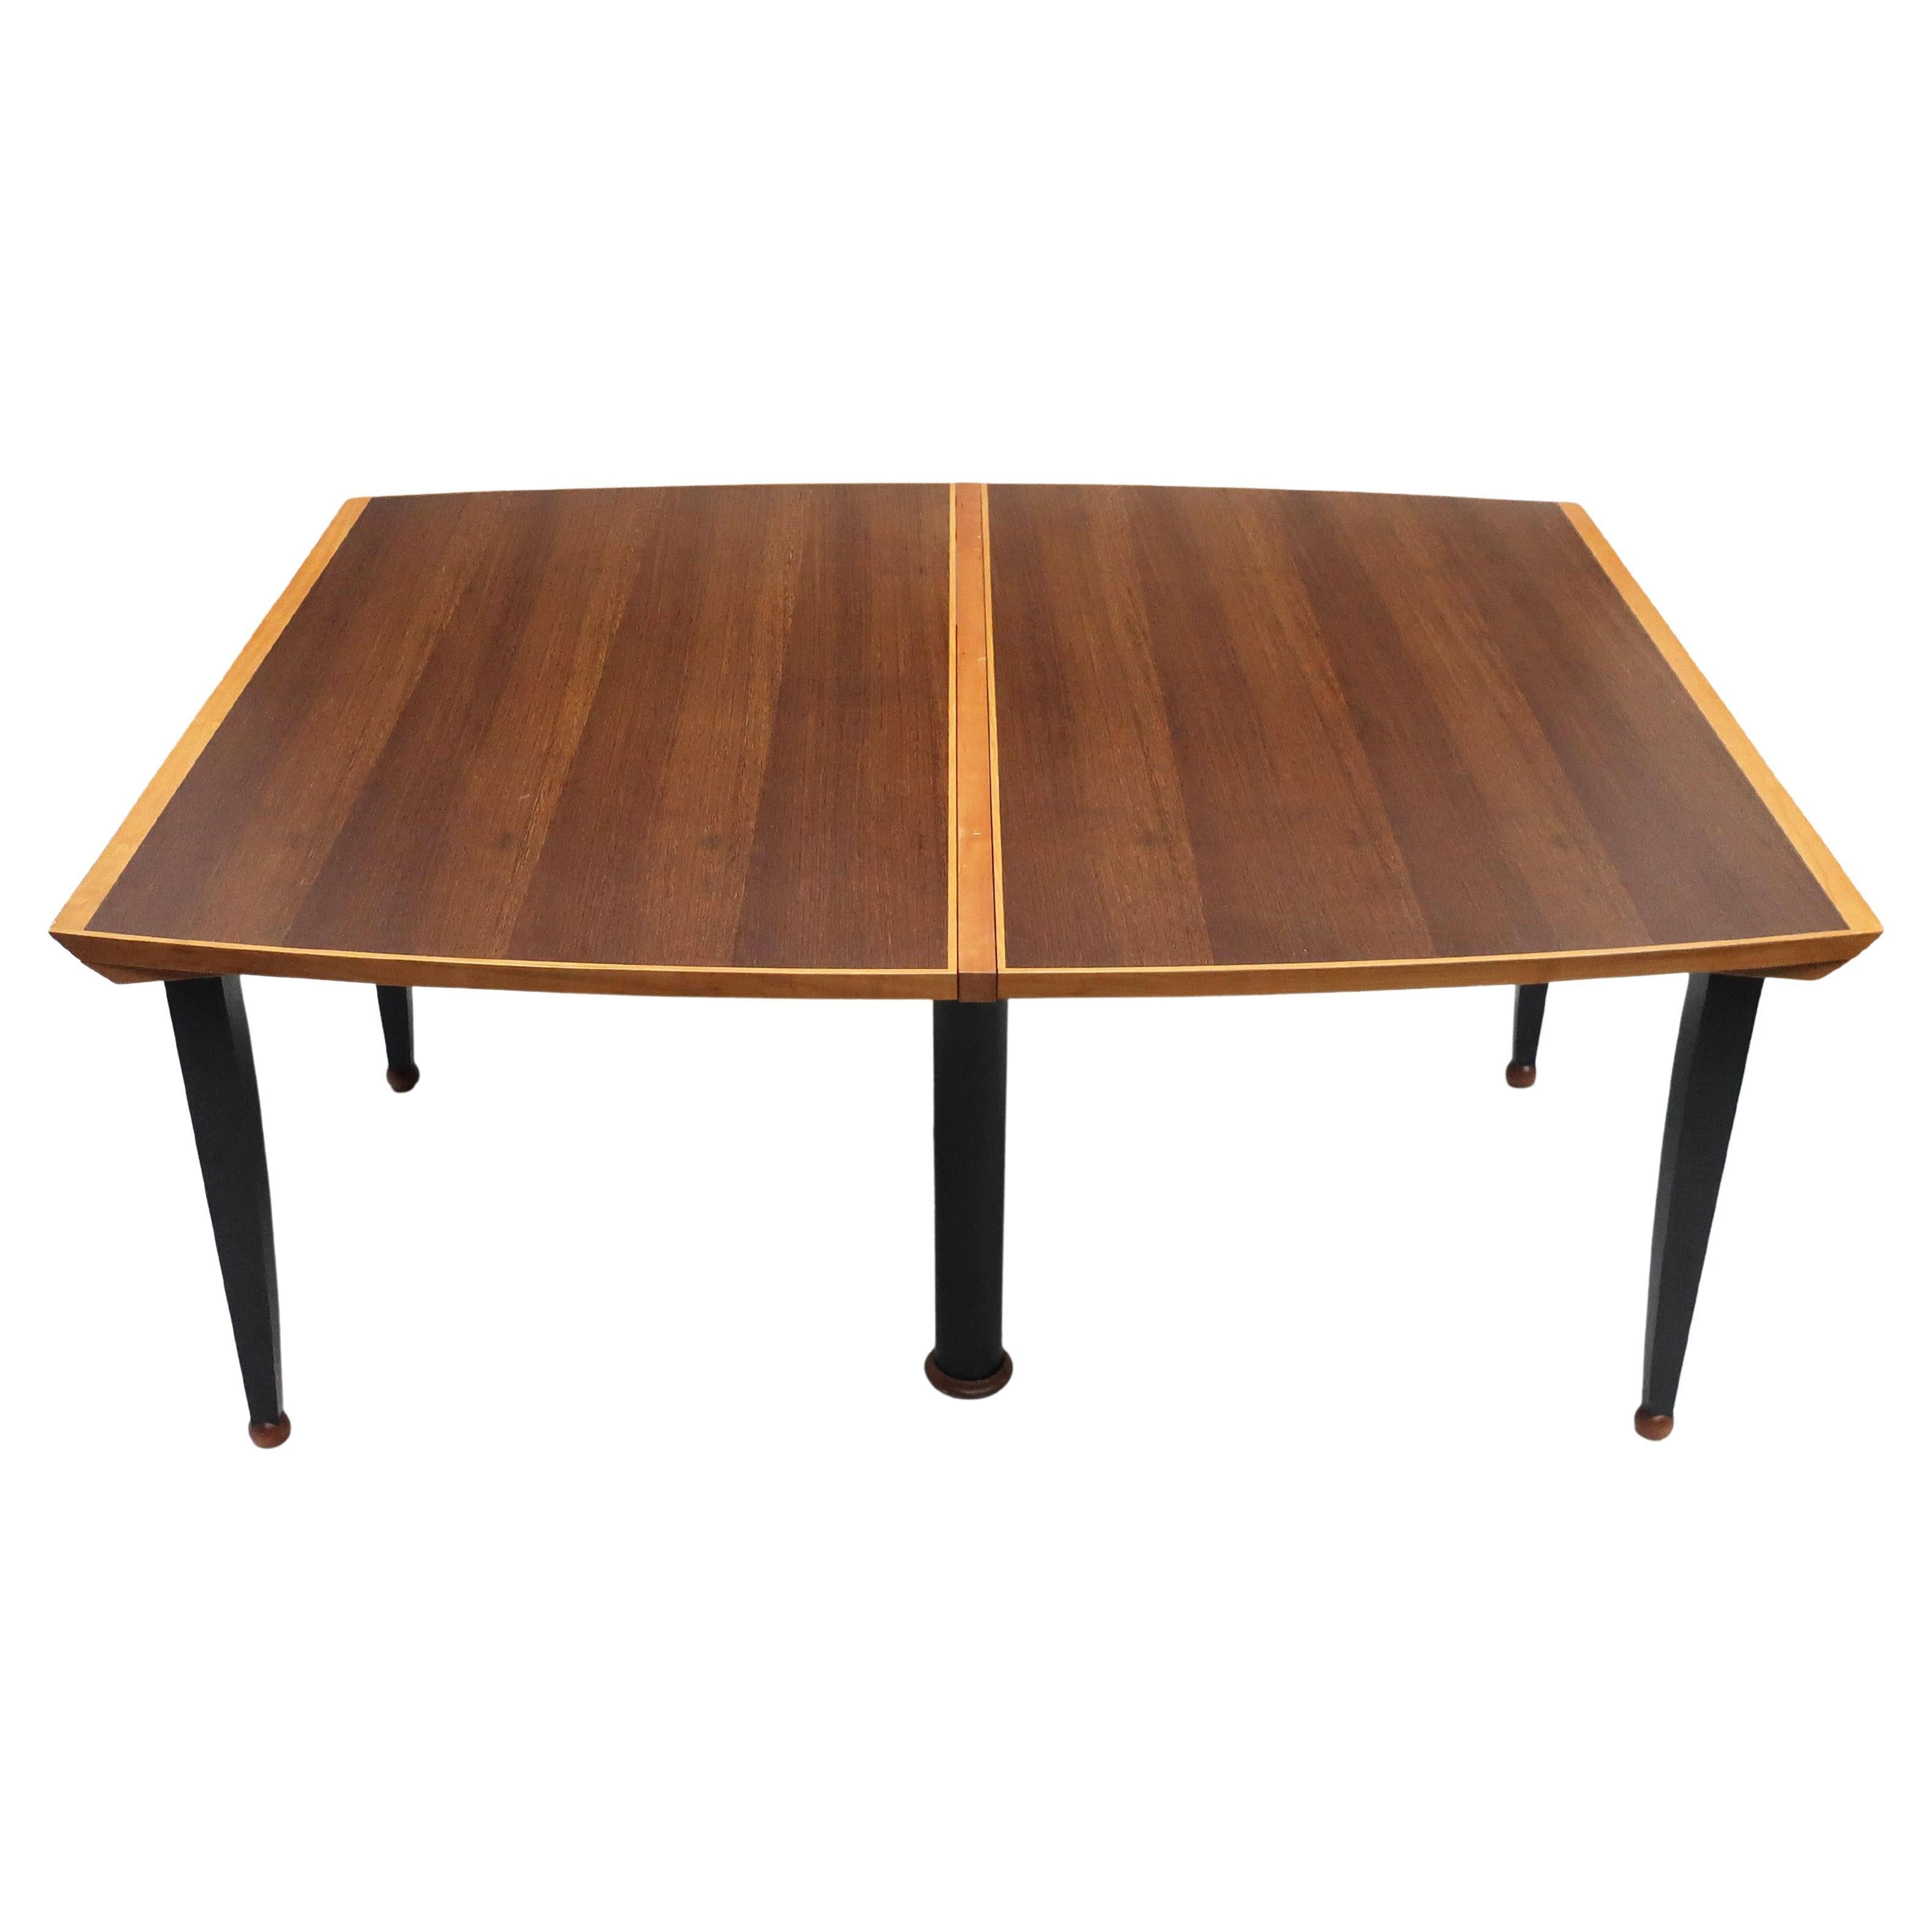 Tabula Magna Dining Table by Oscar Tosquets Blanca for Driade Aleph, '1991' For Sale